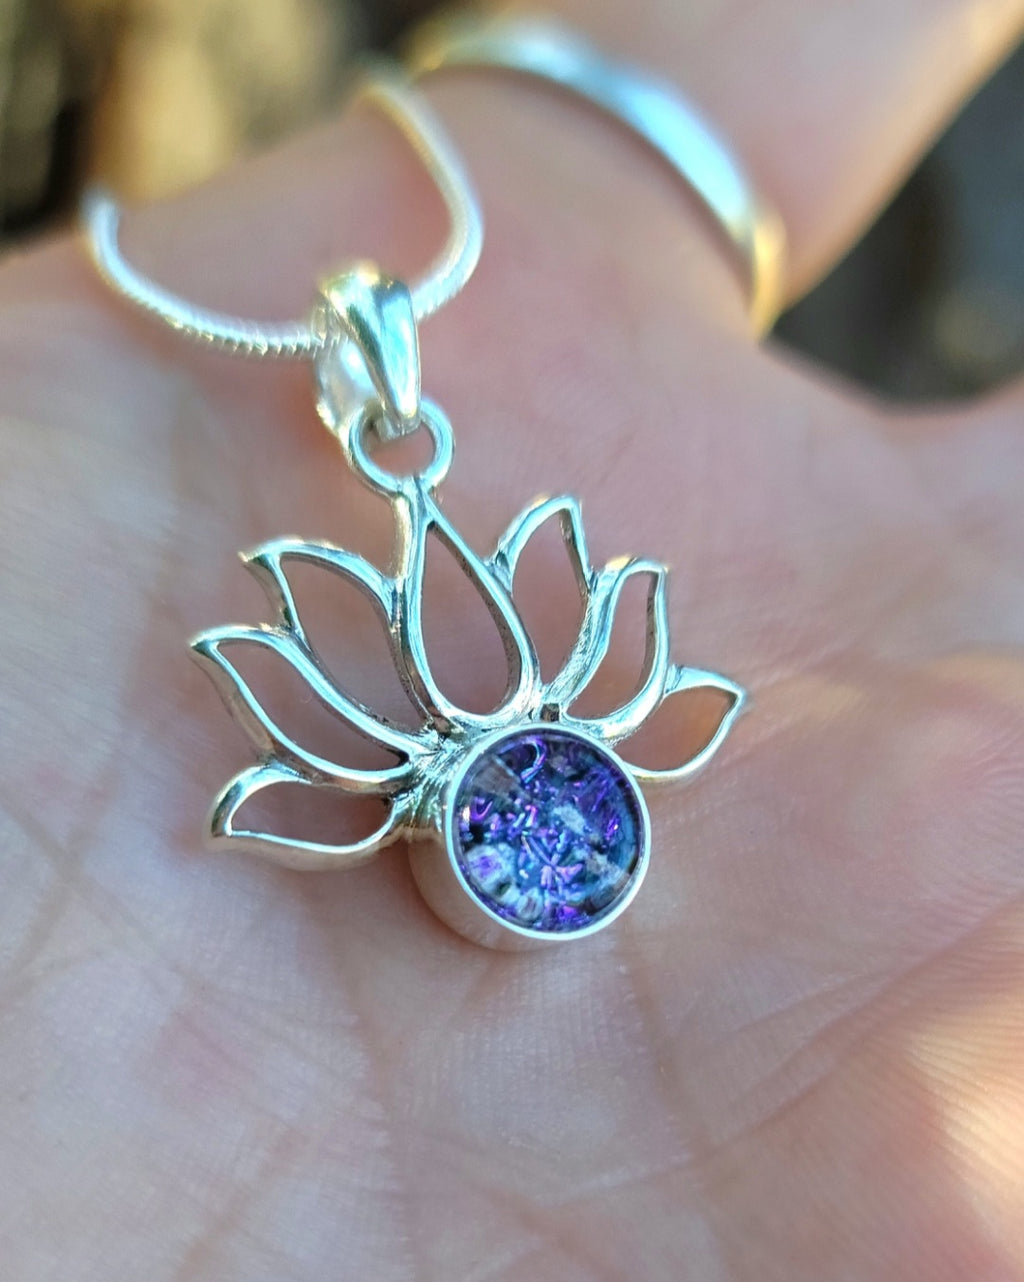 NEW Boho Lotus Flower Cremation Jewelry Pendant Ashes InFused Glass Bali Silver